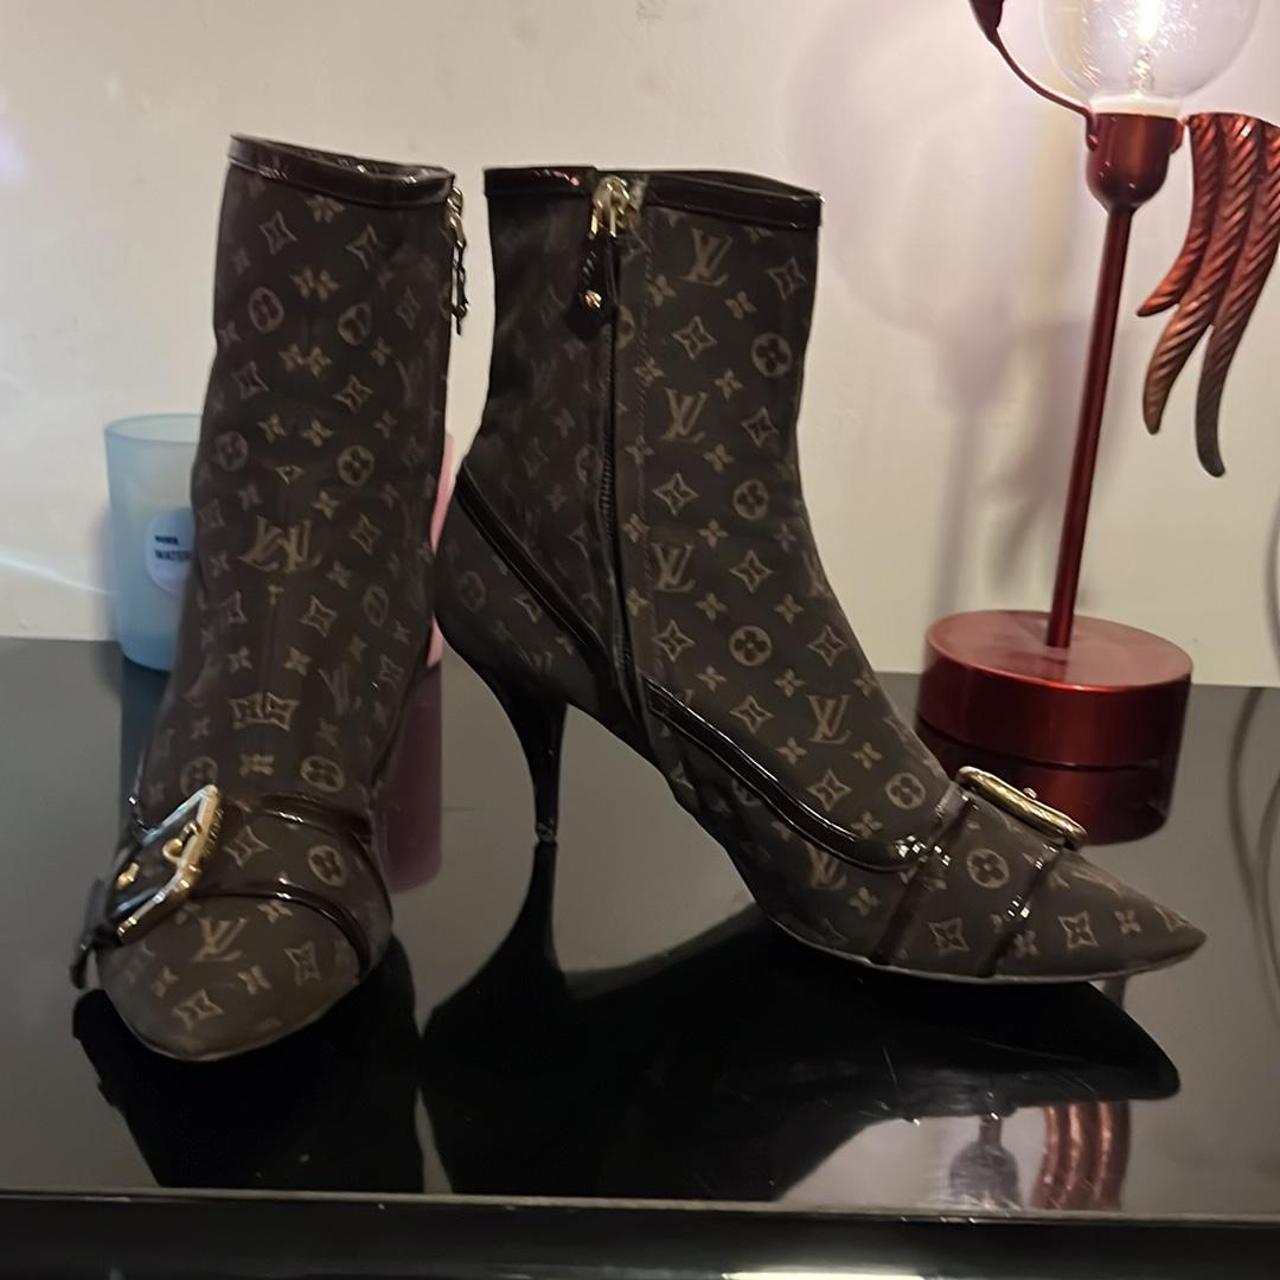 Louis Vuitton Fireball Leather Monogram Ankle Boots